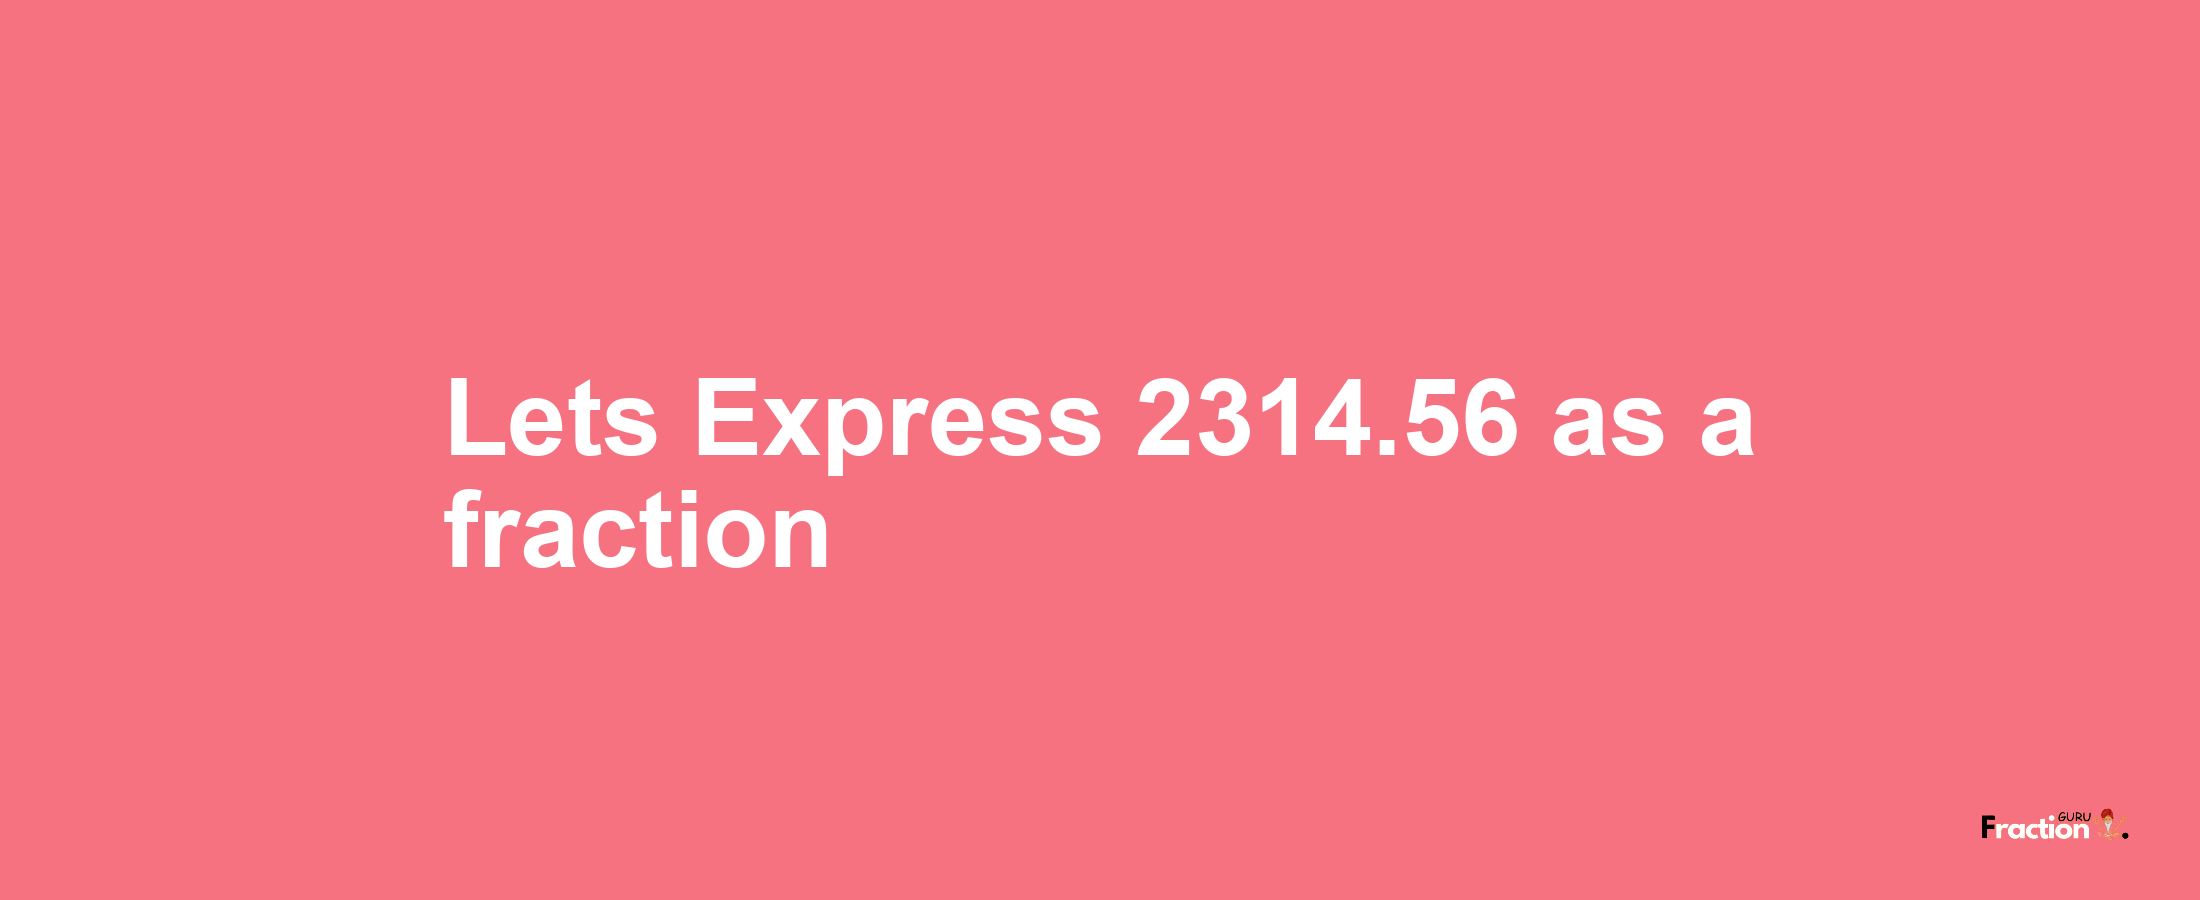 Lets Express 2314.56 as afraction